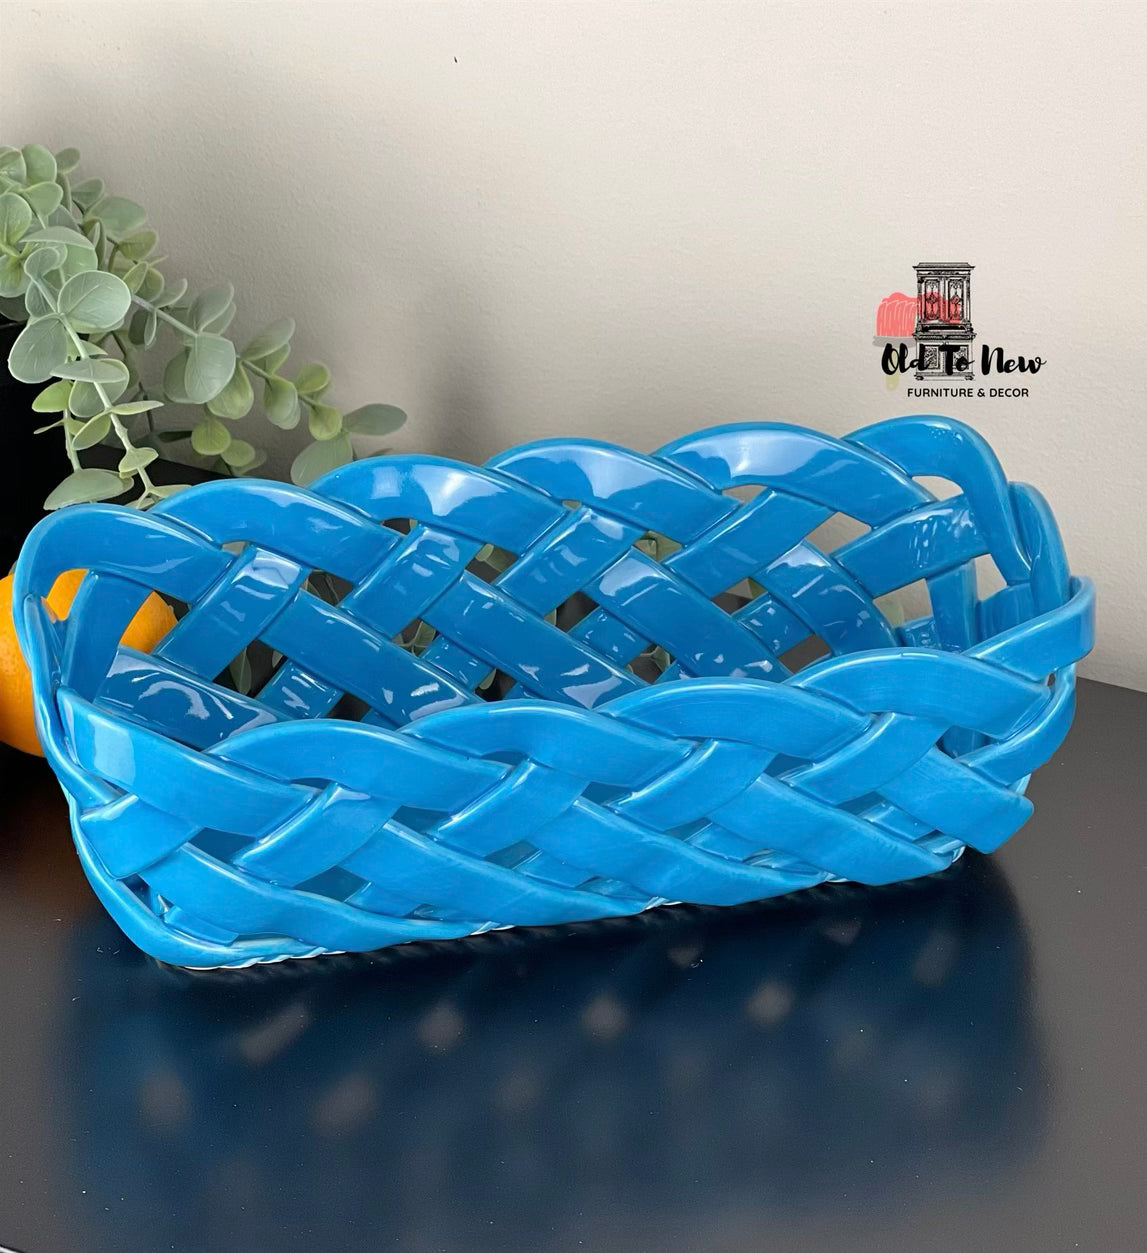 Primo'Gi ceramic woven bread basket, Made in Italy, Old to New Furniture & Decor